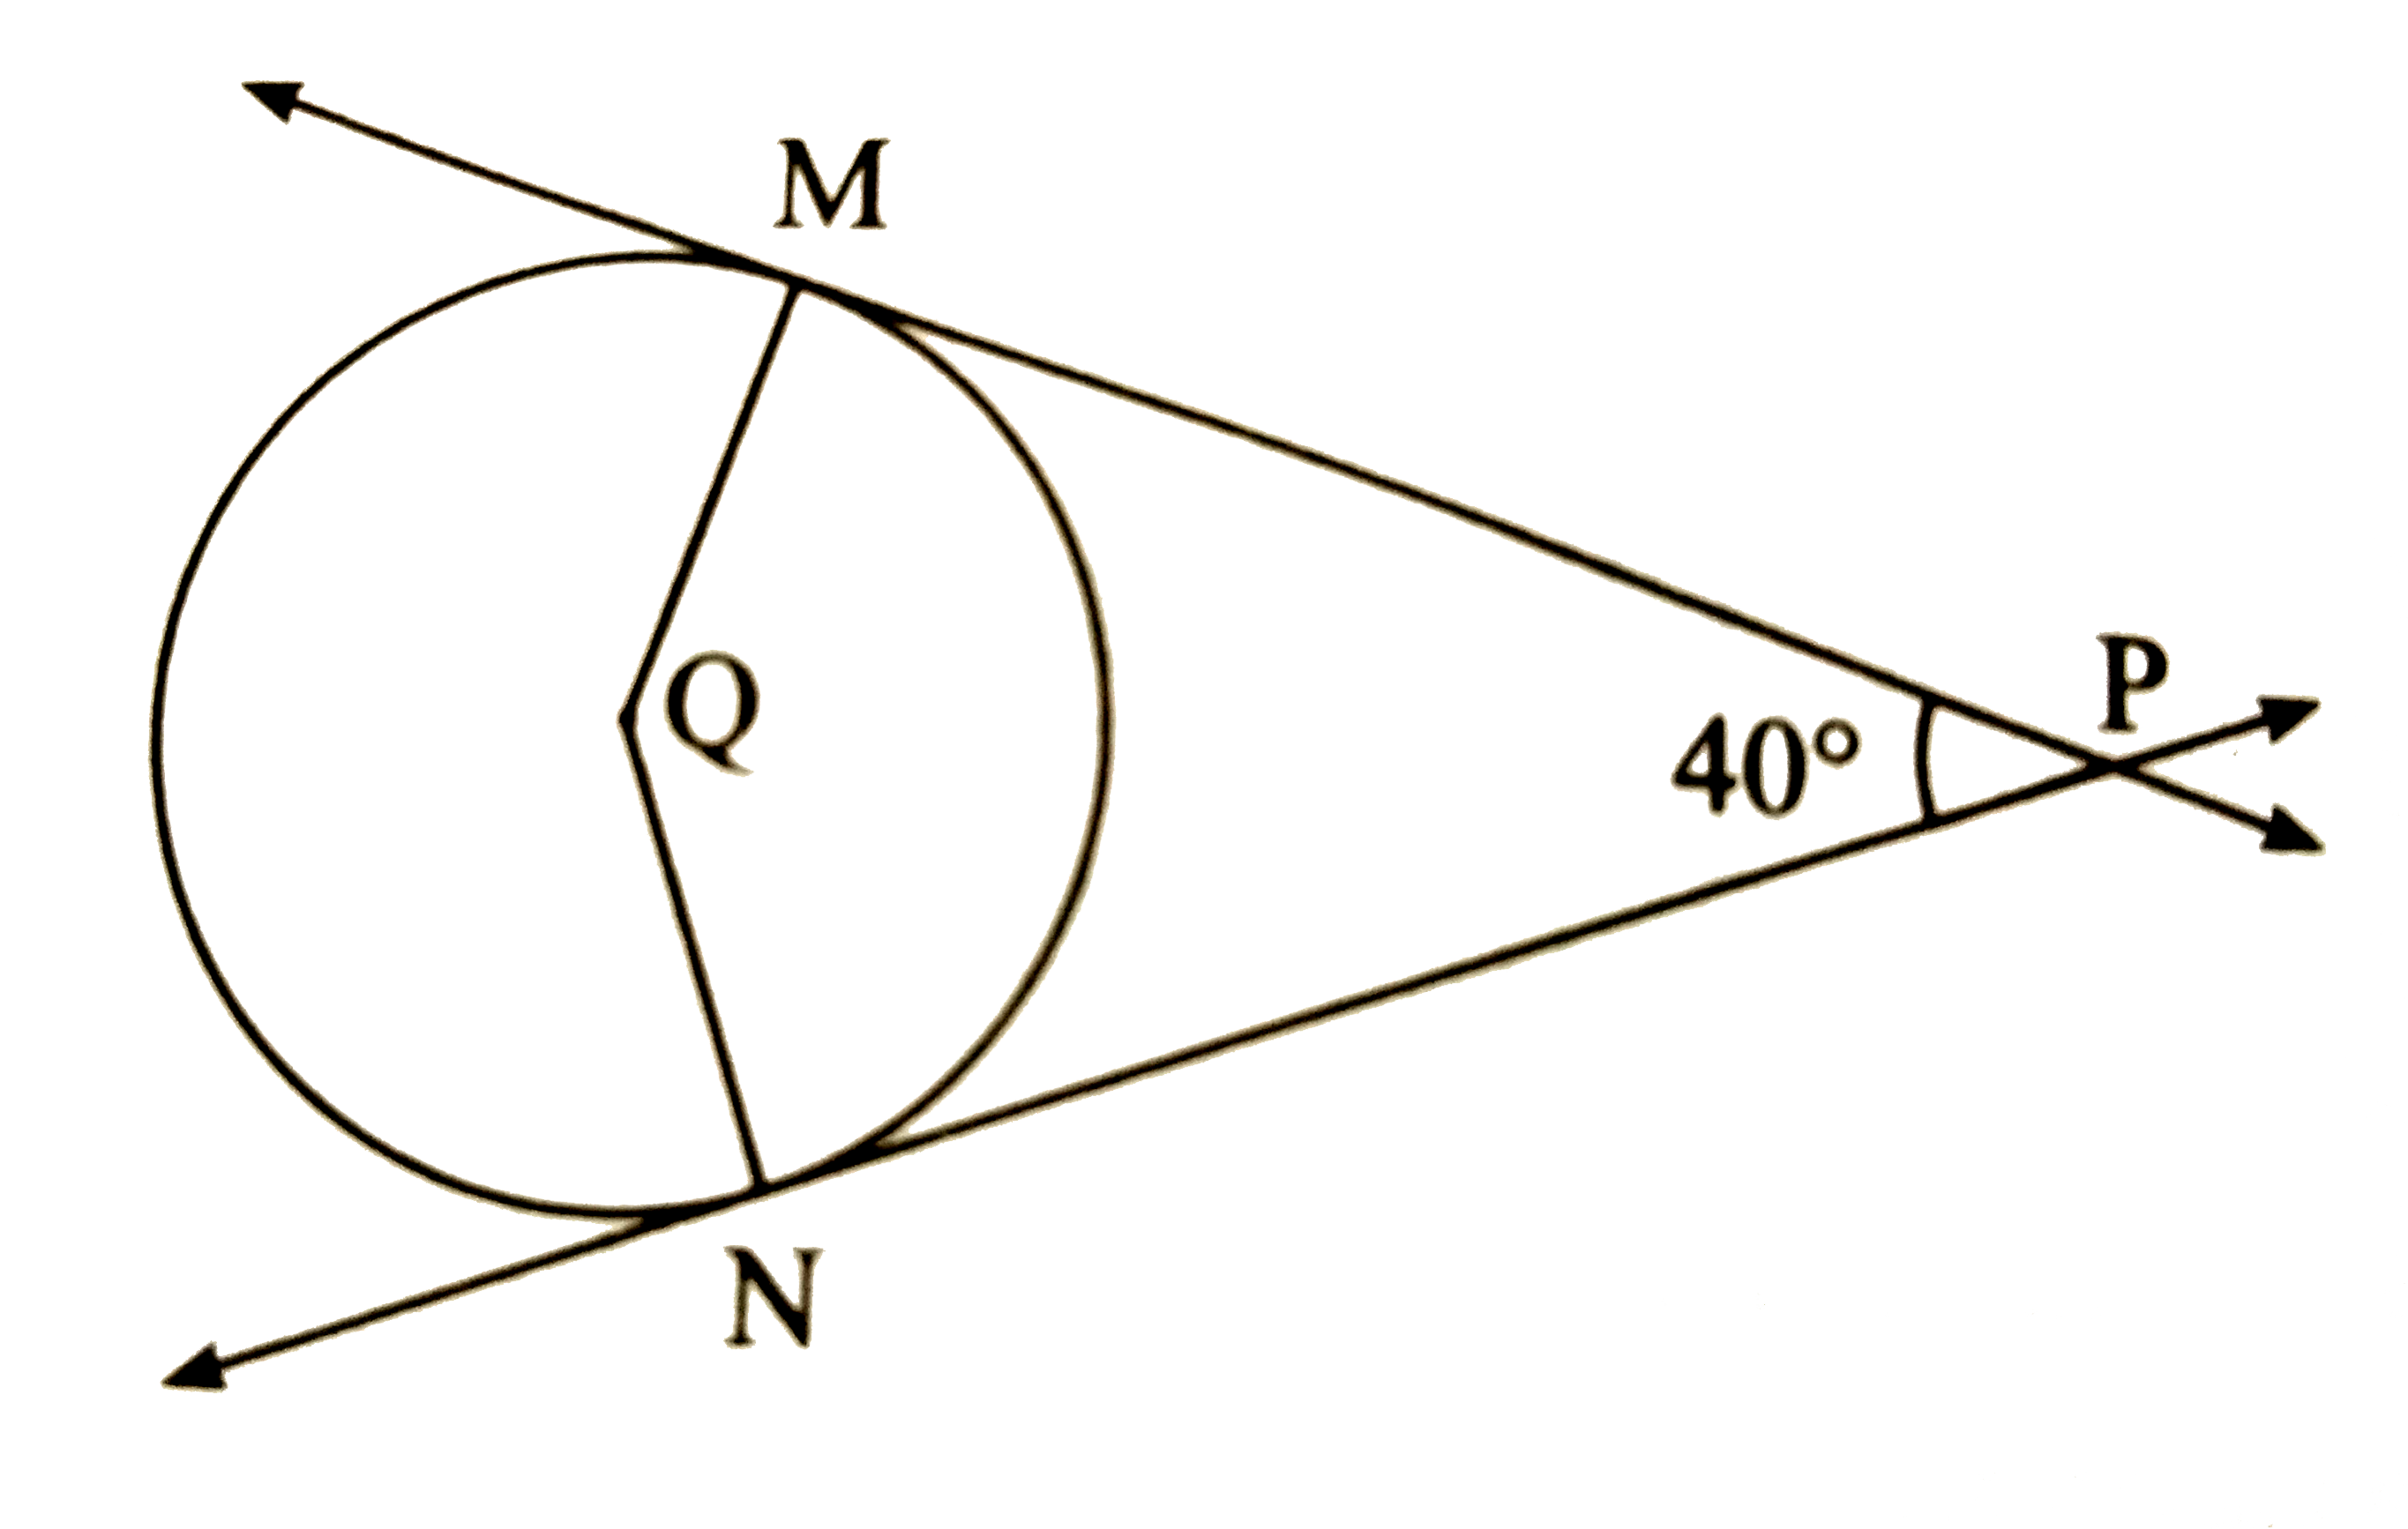 In the figrure, Q is the centre of the circle and PM and PN   are tangent segments to the circle. If / MPN = 40^(@), find / MQN